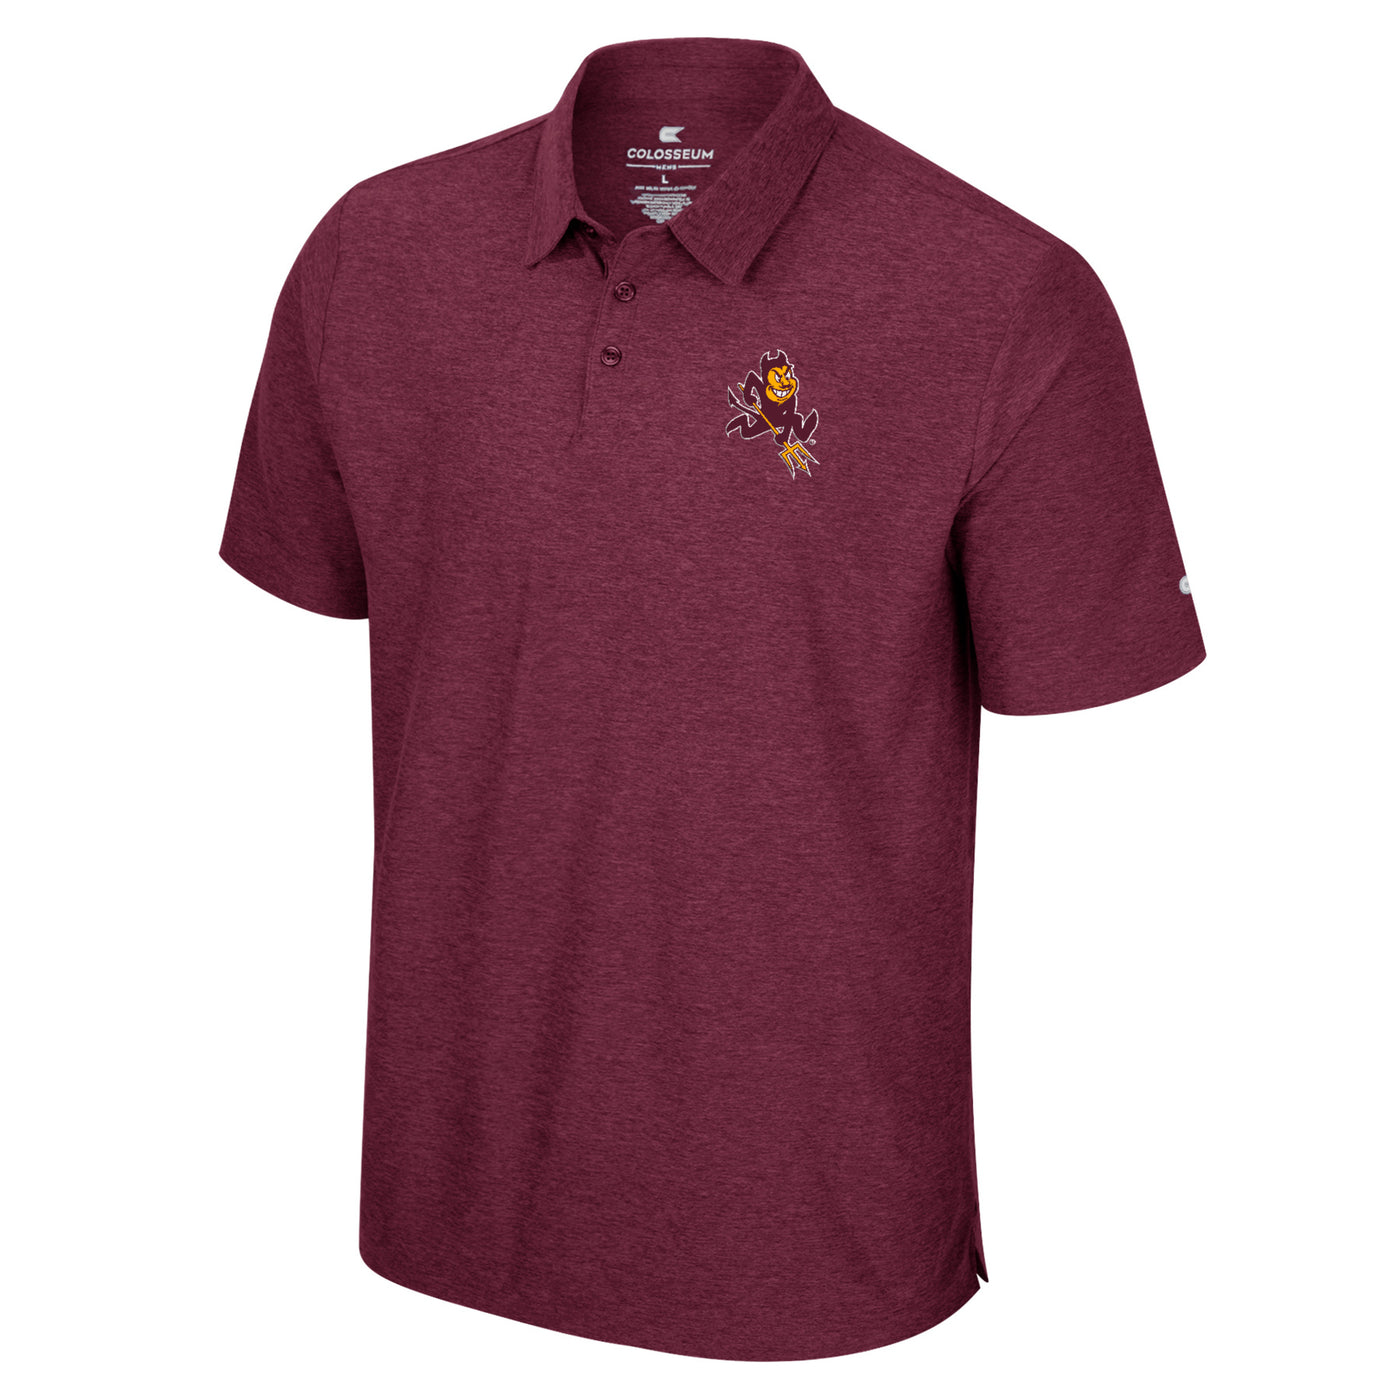 ASU maroon polo with sparky logo embroidered on the left chest pocket area. 